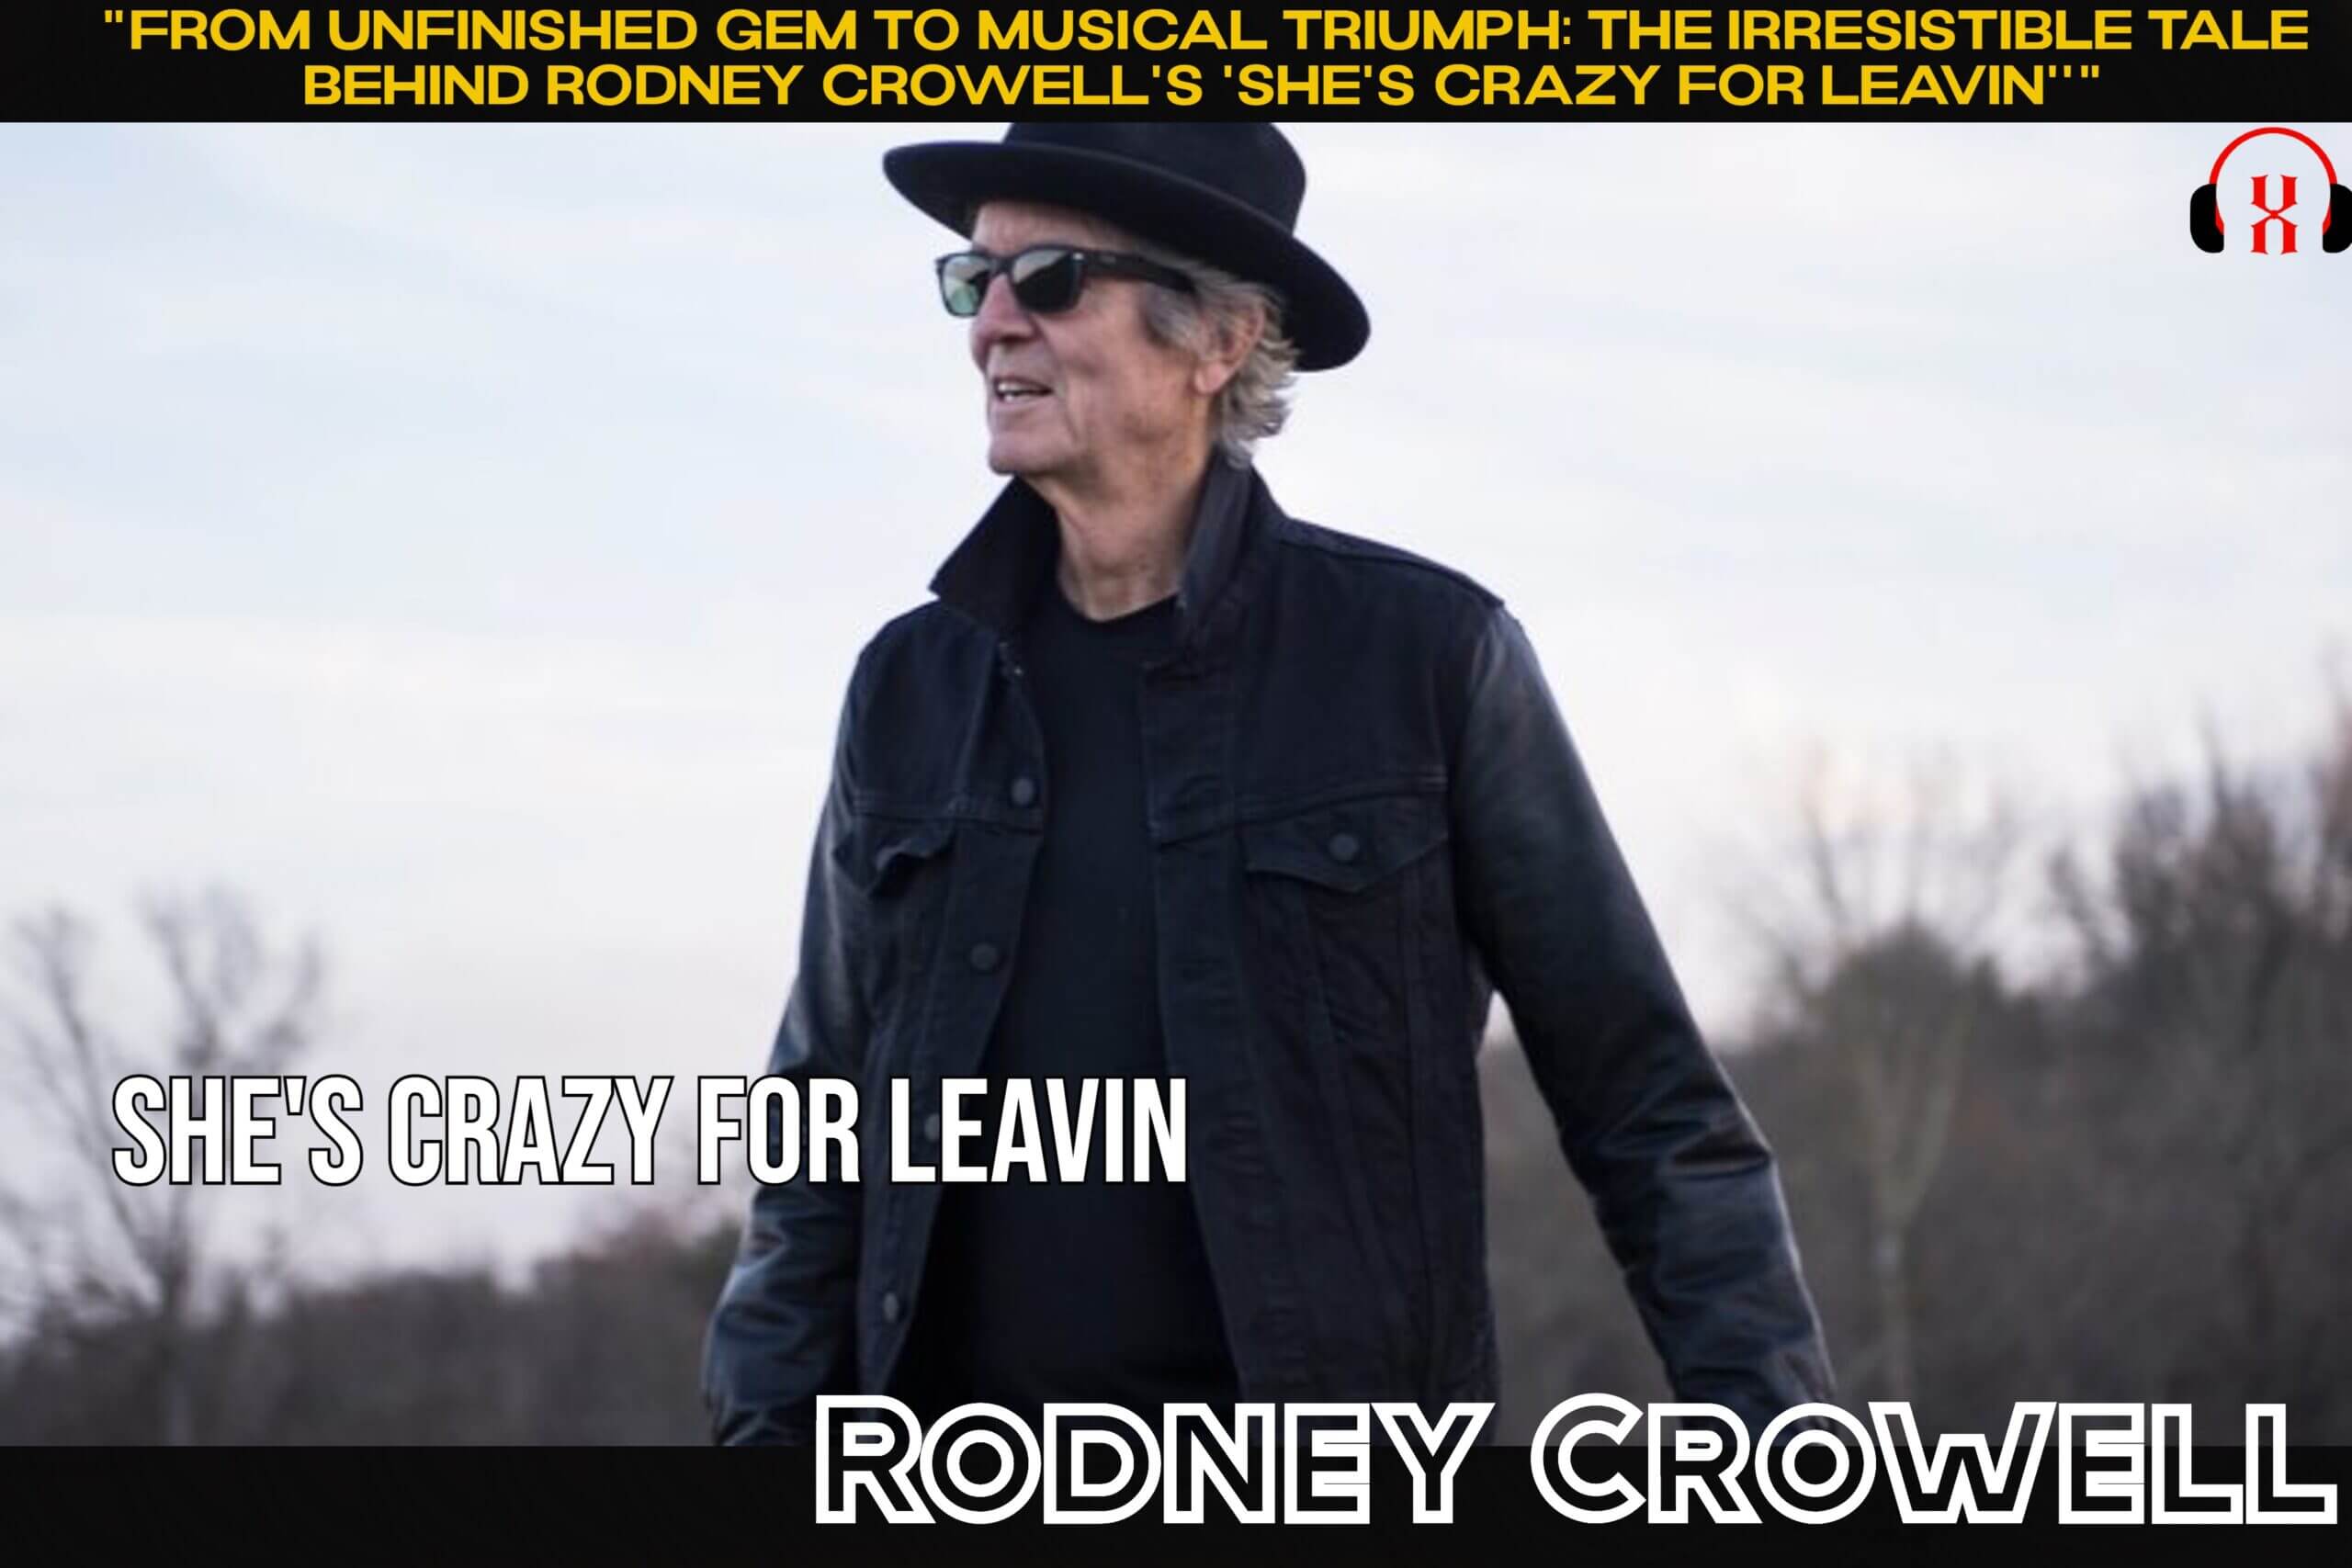 “From Unfinished Gem to Musical Triumph: The Irresistible Tale Behind Rodney Crowell’s ‘She’s Crazy For Leavin””